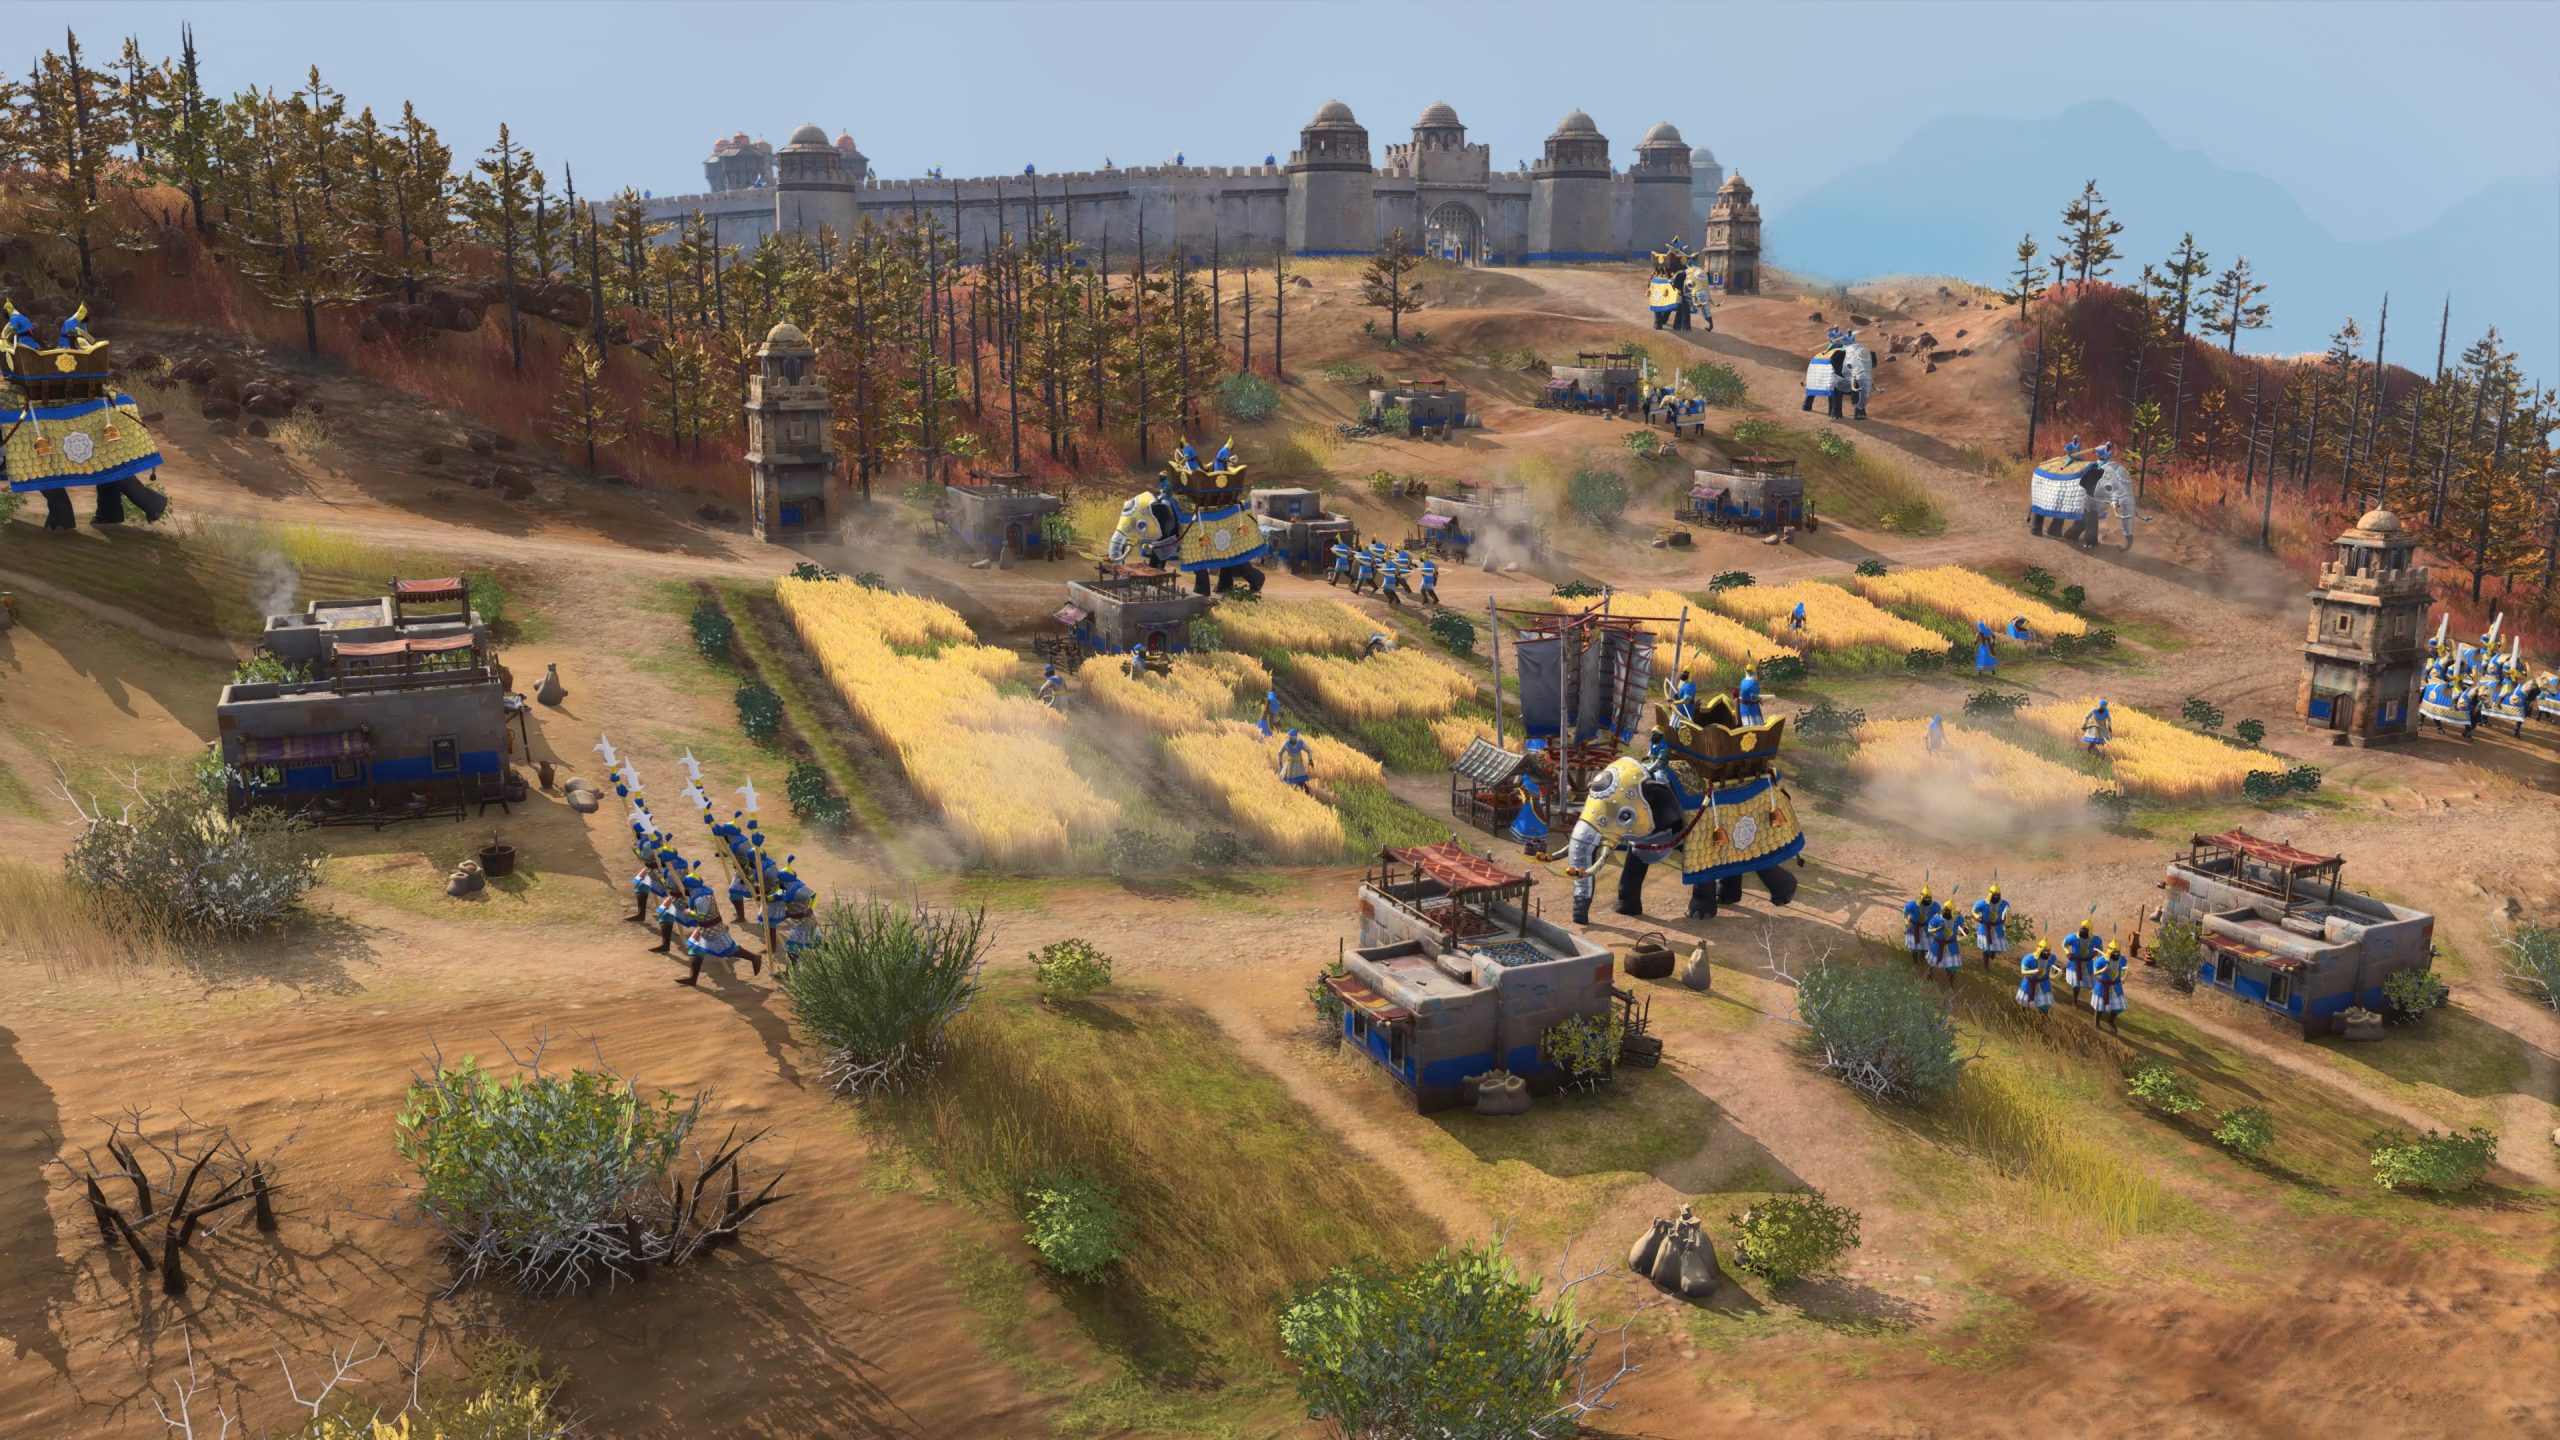 Age of Empires IV Release Window Set to Fall 2021; New Gameplay Out Now